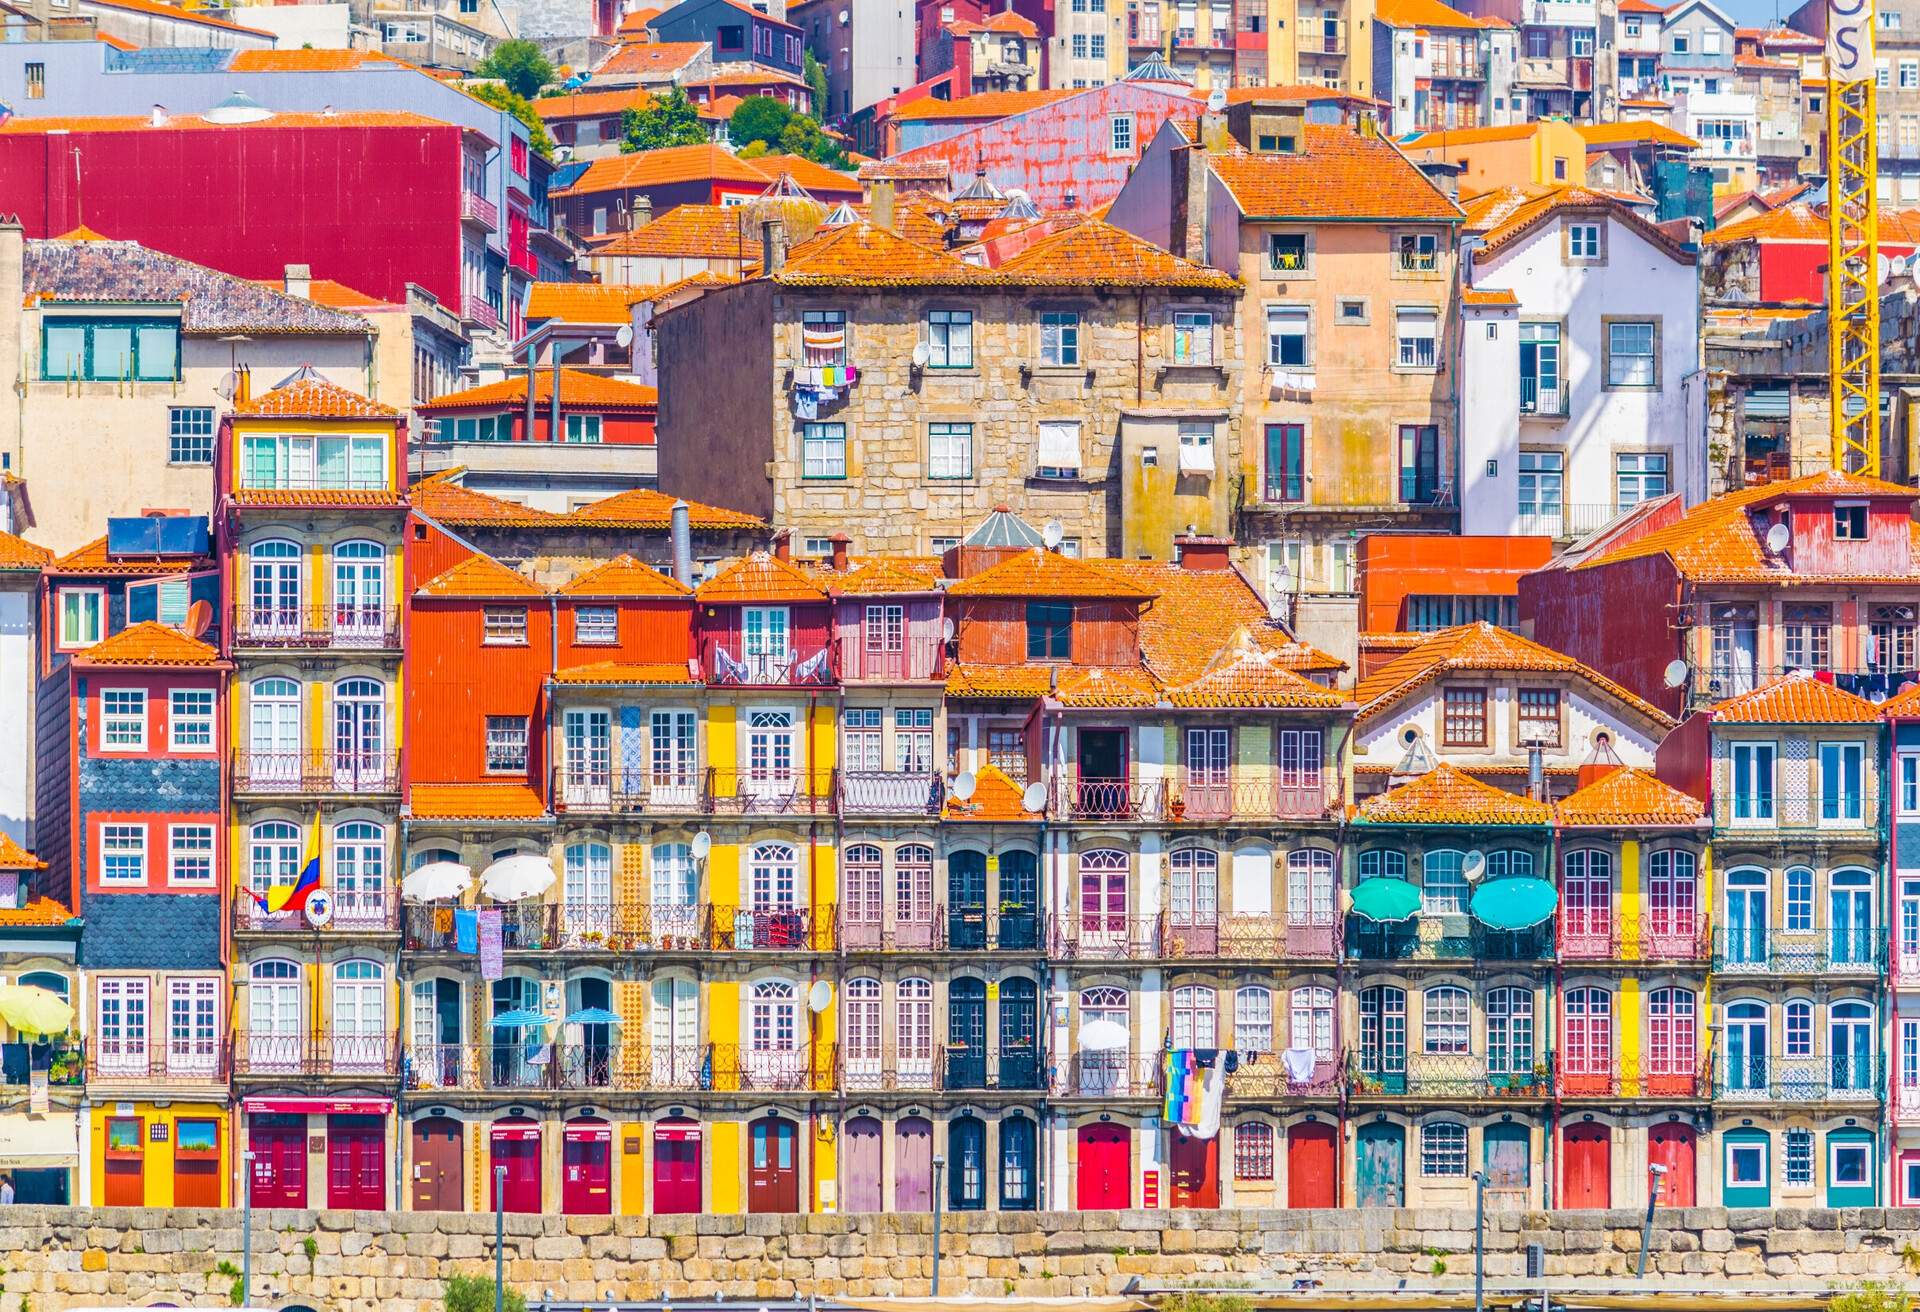 DEST_PORTUGAL_PORTO_Close up of colorful homes on water-shutterstock-premier_764921260